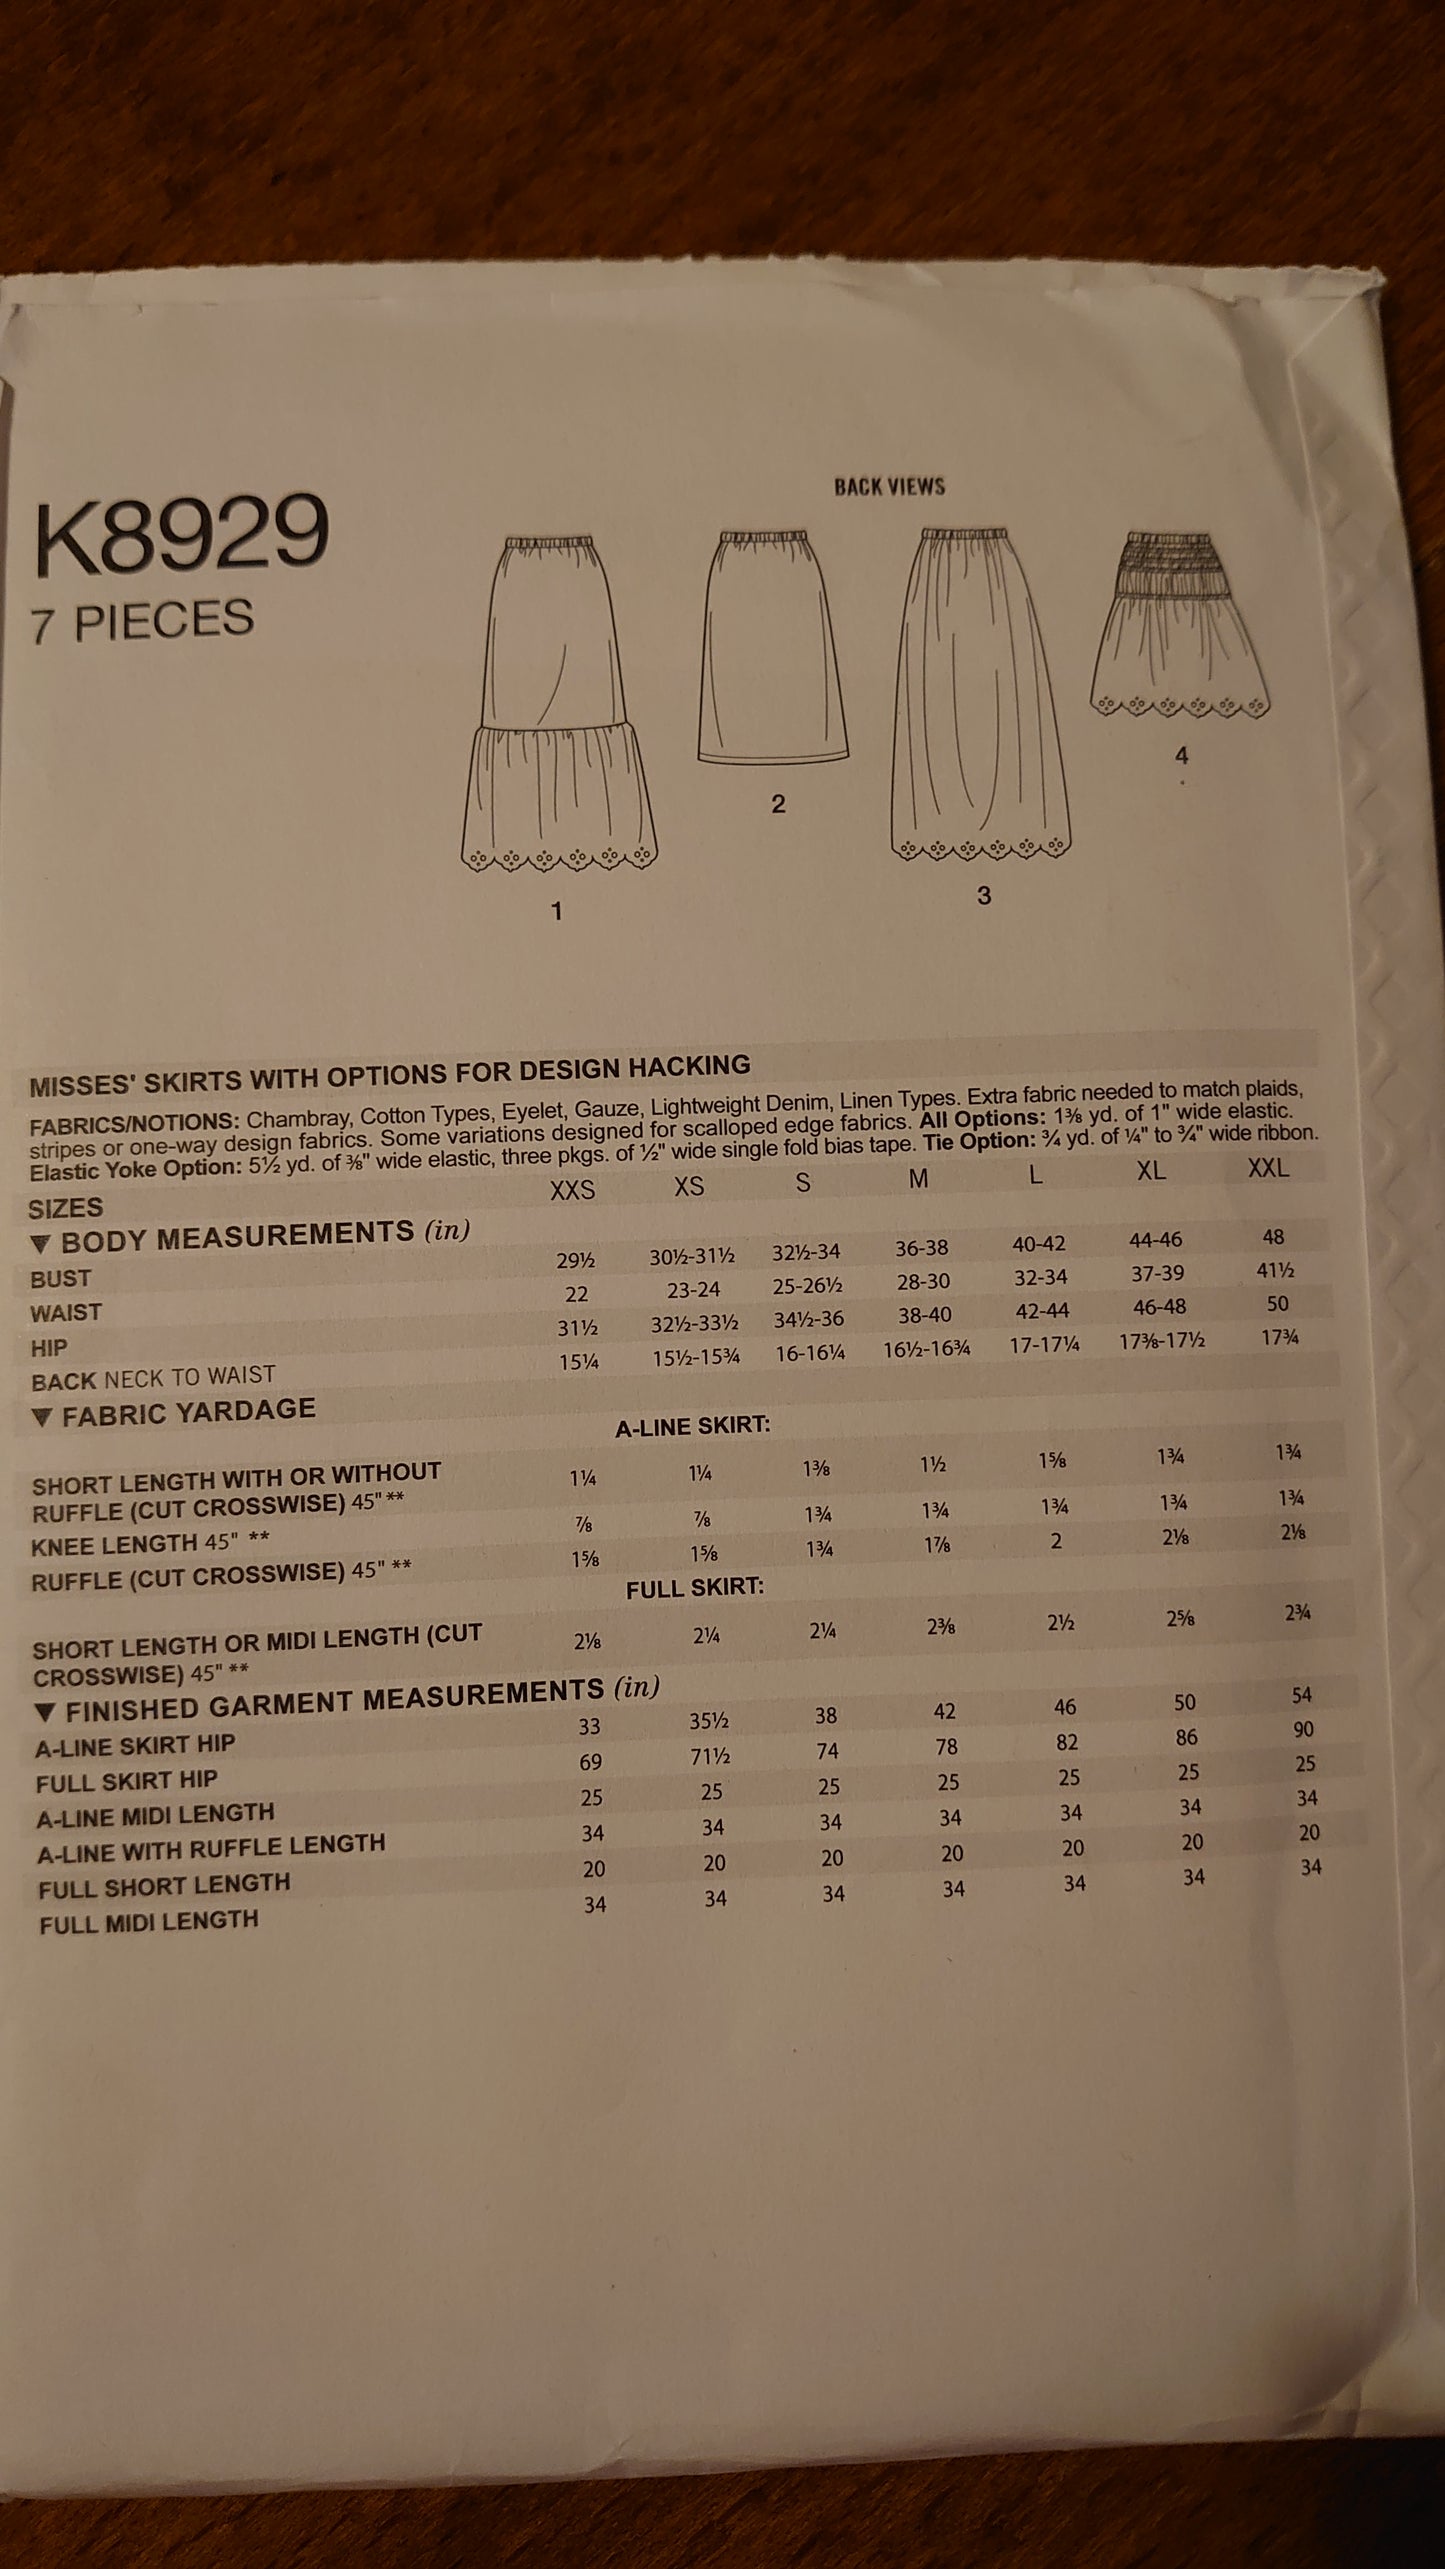 Simplicity K8929 Sewing Pattern